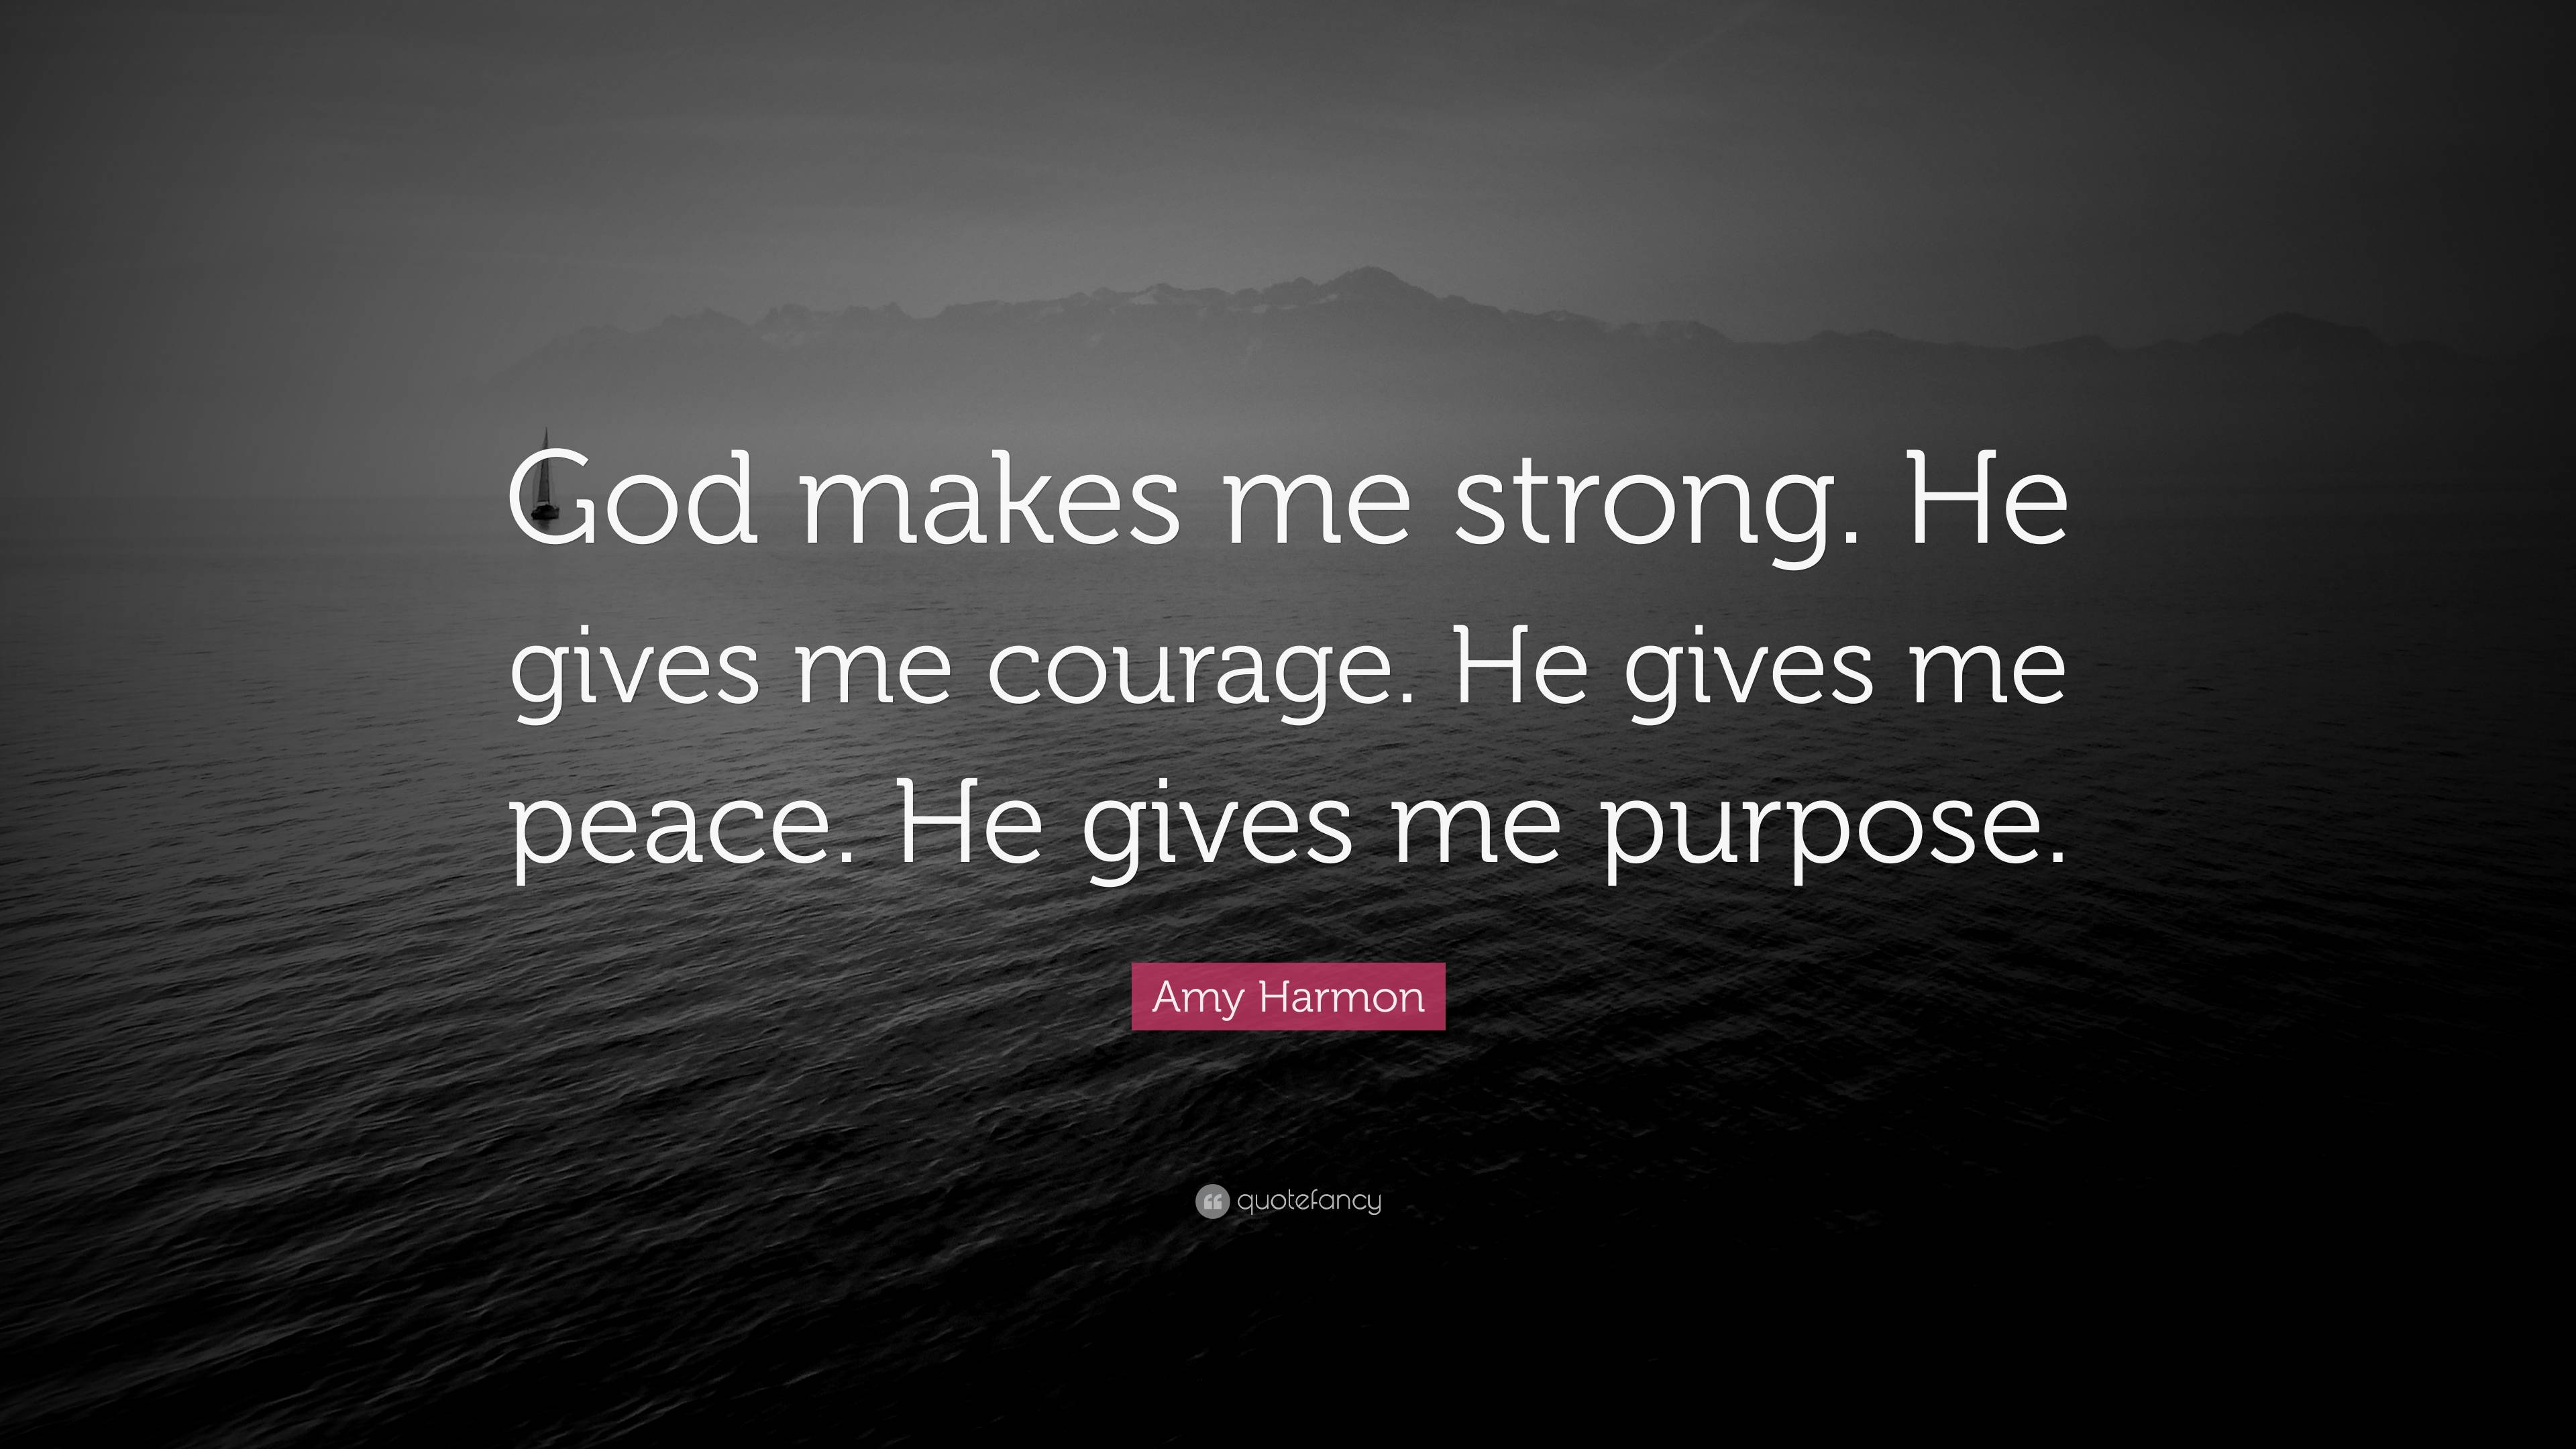 Amy Harmon Quote: “God makes me strong. He gives me courage. He gives ...